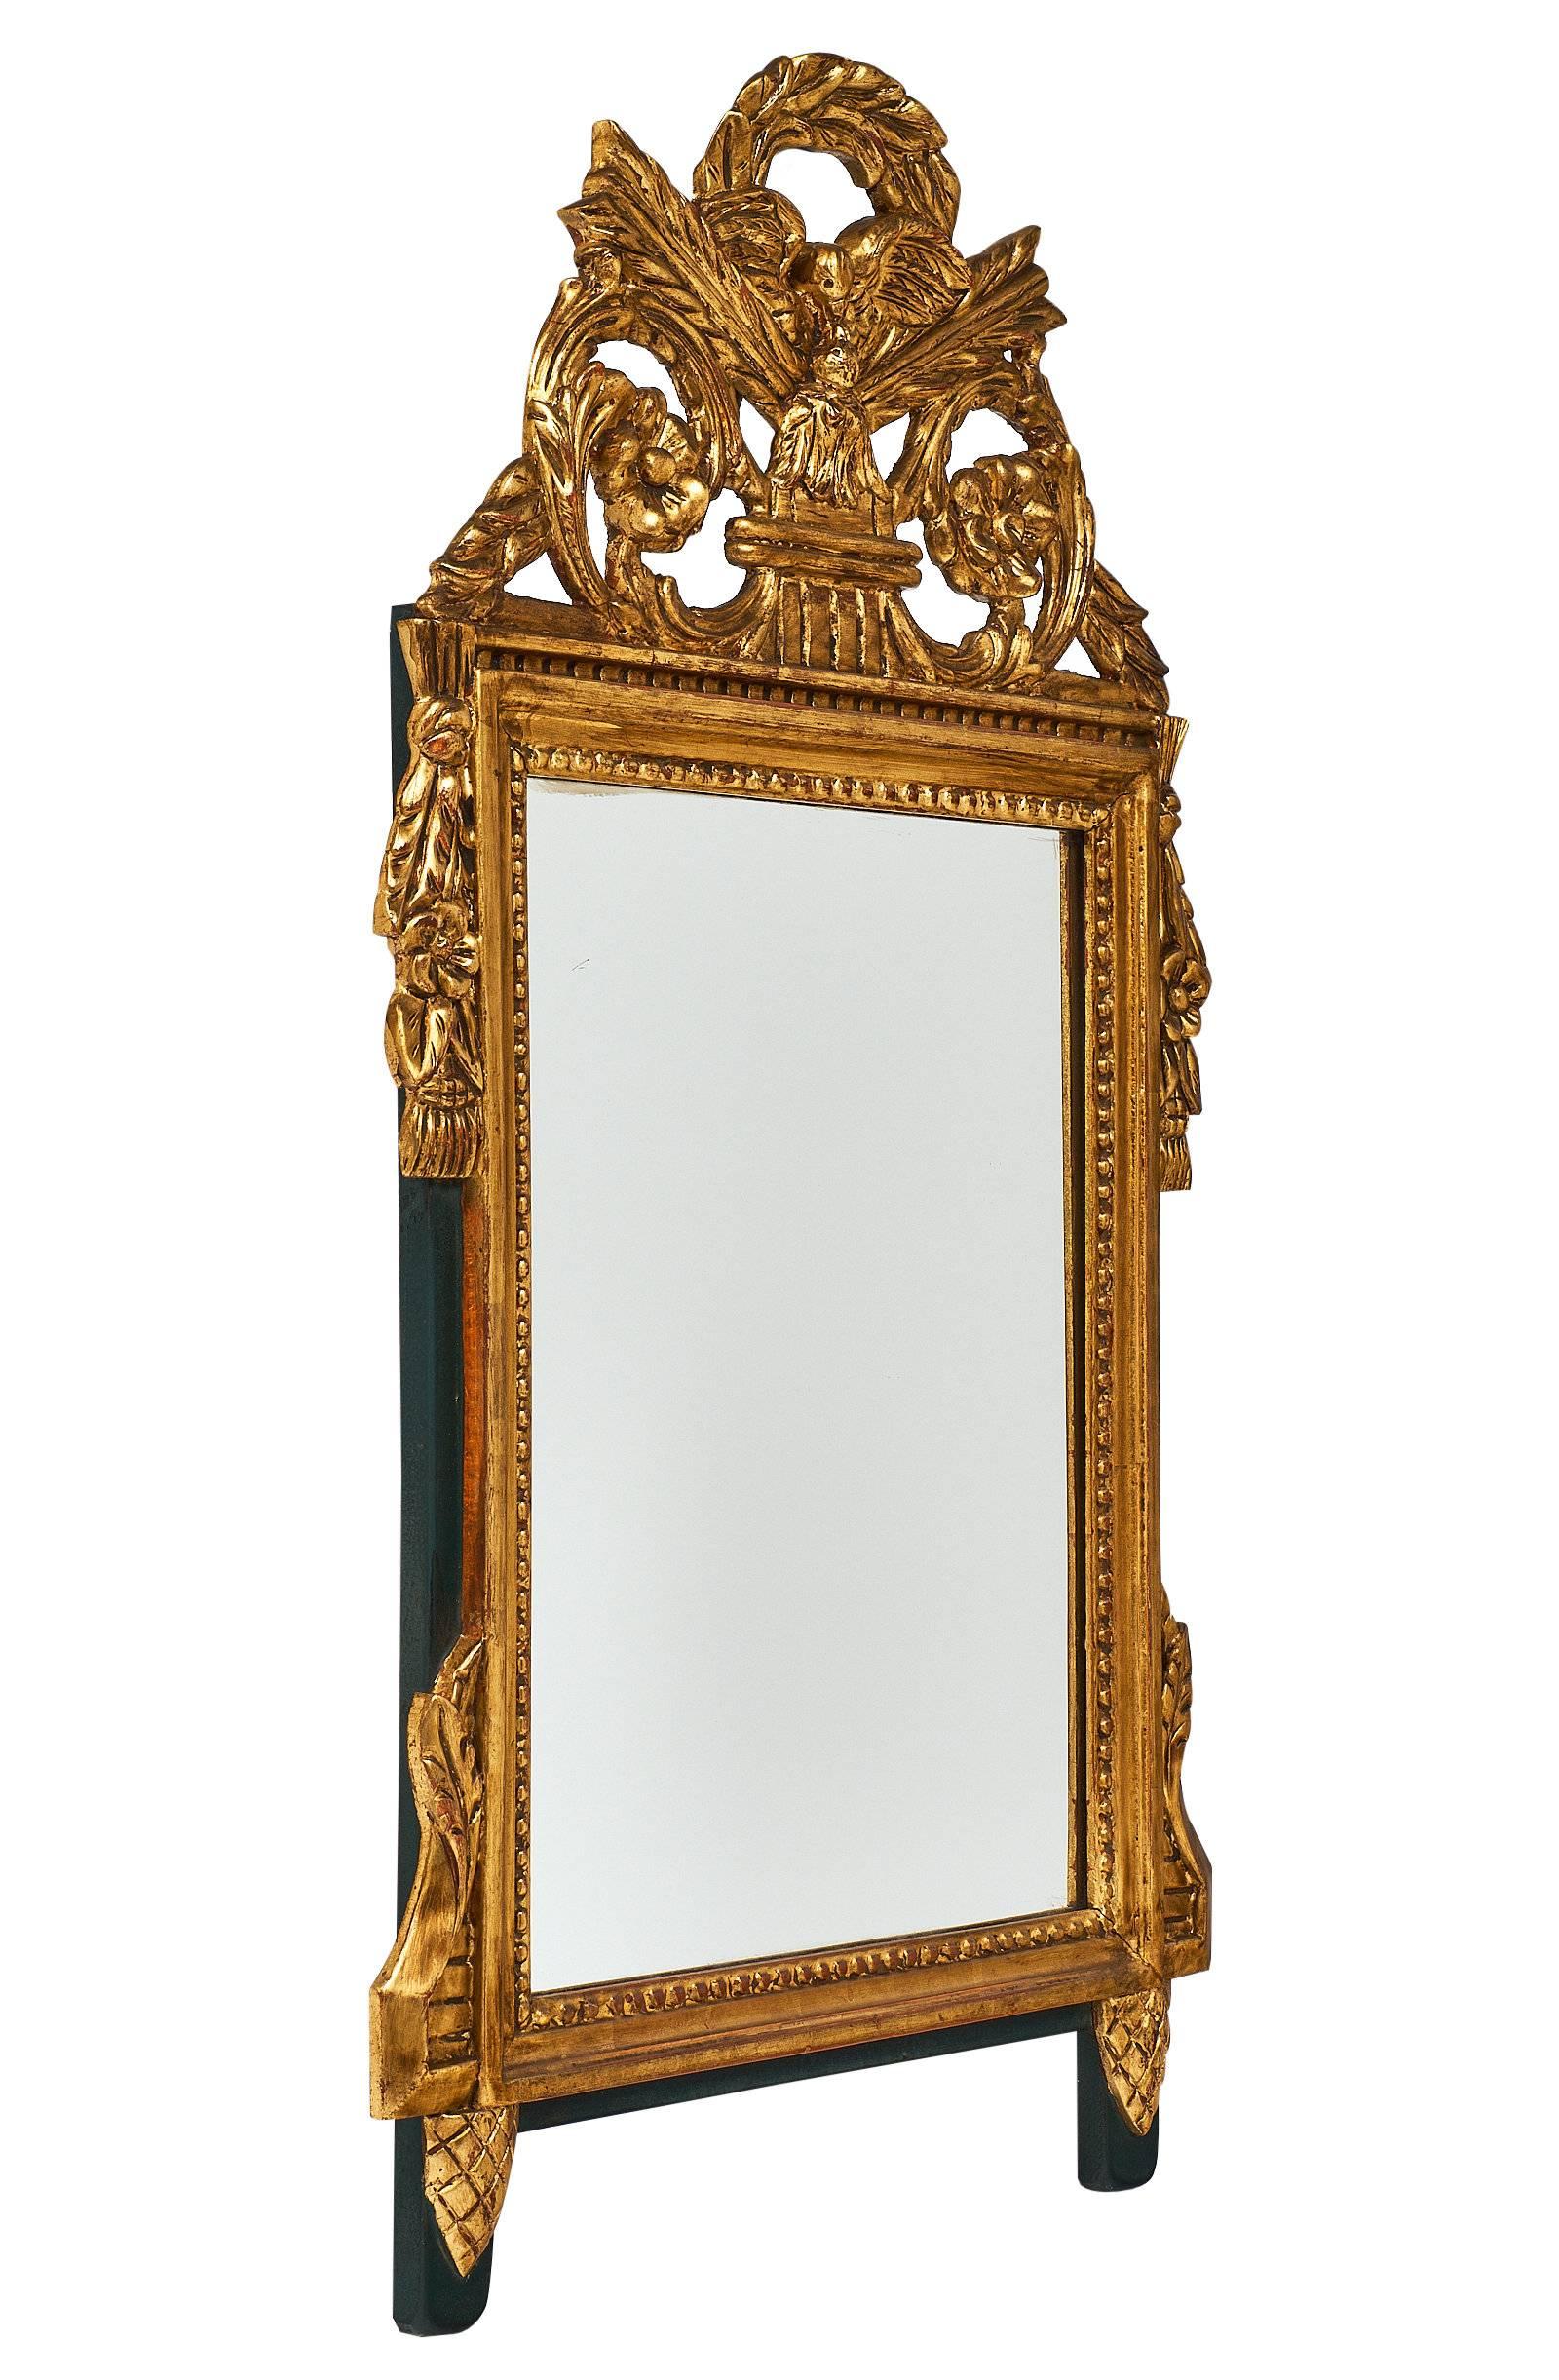 A French antique Louis XVI style mirror featuring hand-carved decor on wood of arrows, laurel crown, acanthus leaves, and florals. The mirror is covered in 23-karat gold leafing.